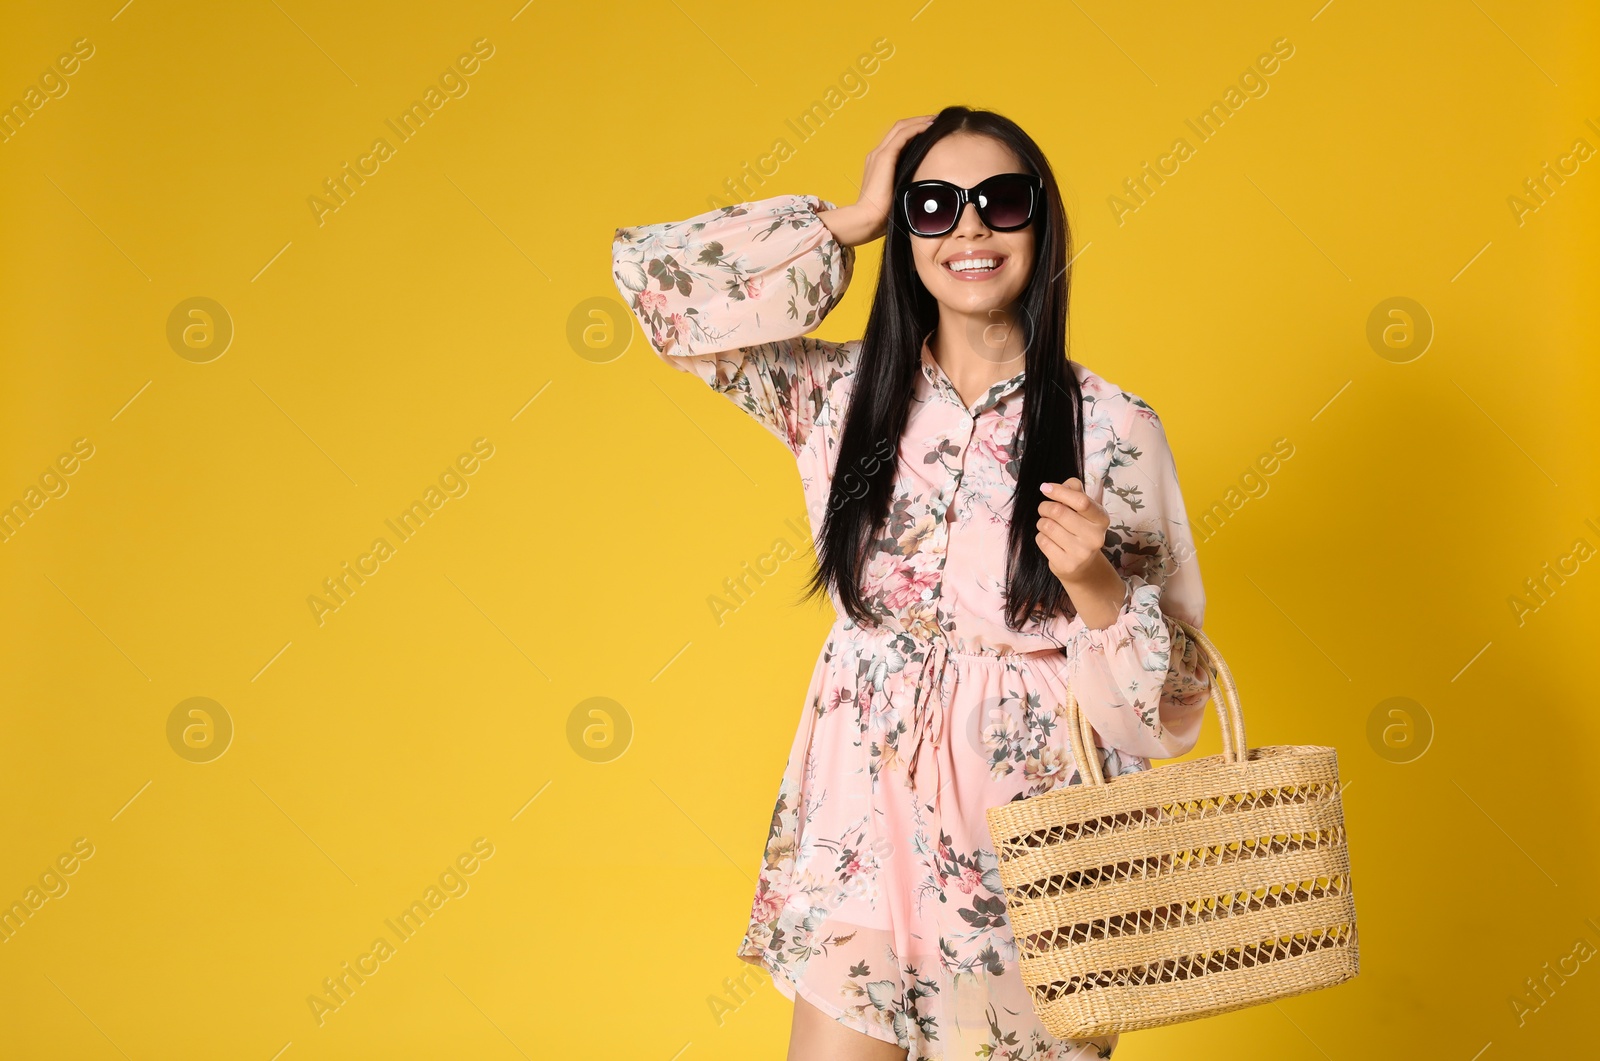 Photo of Young woman wearing floral print dress with straw bag on yellow background